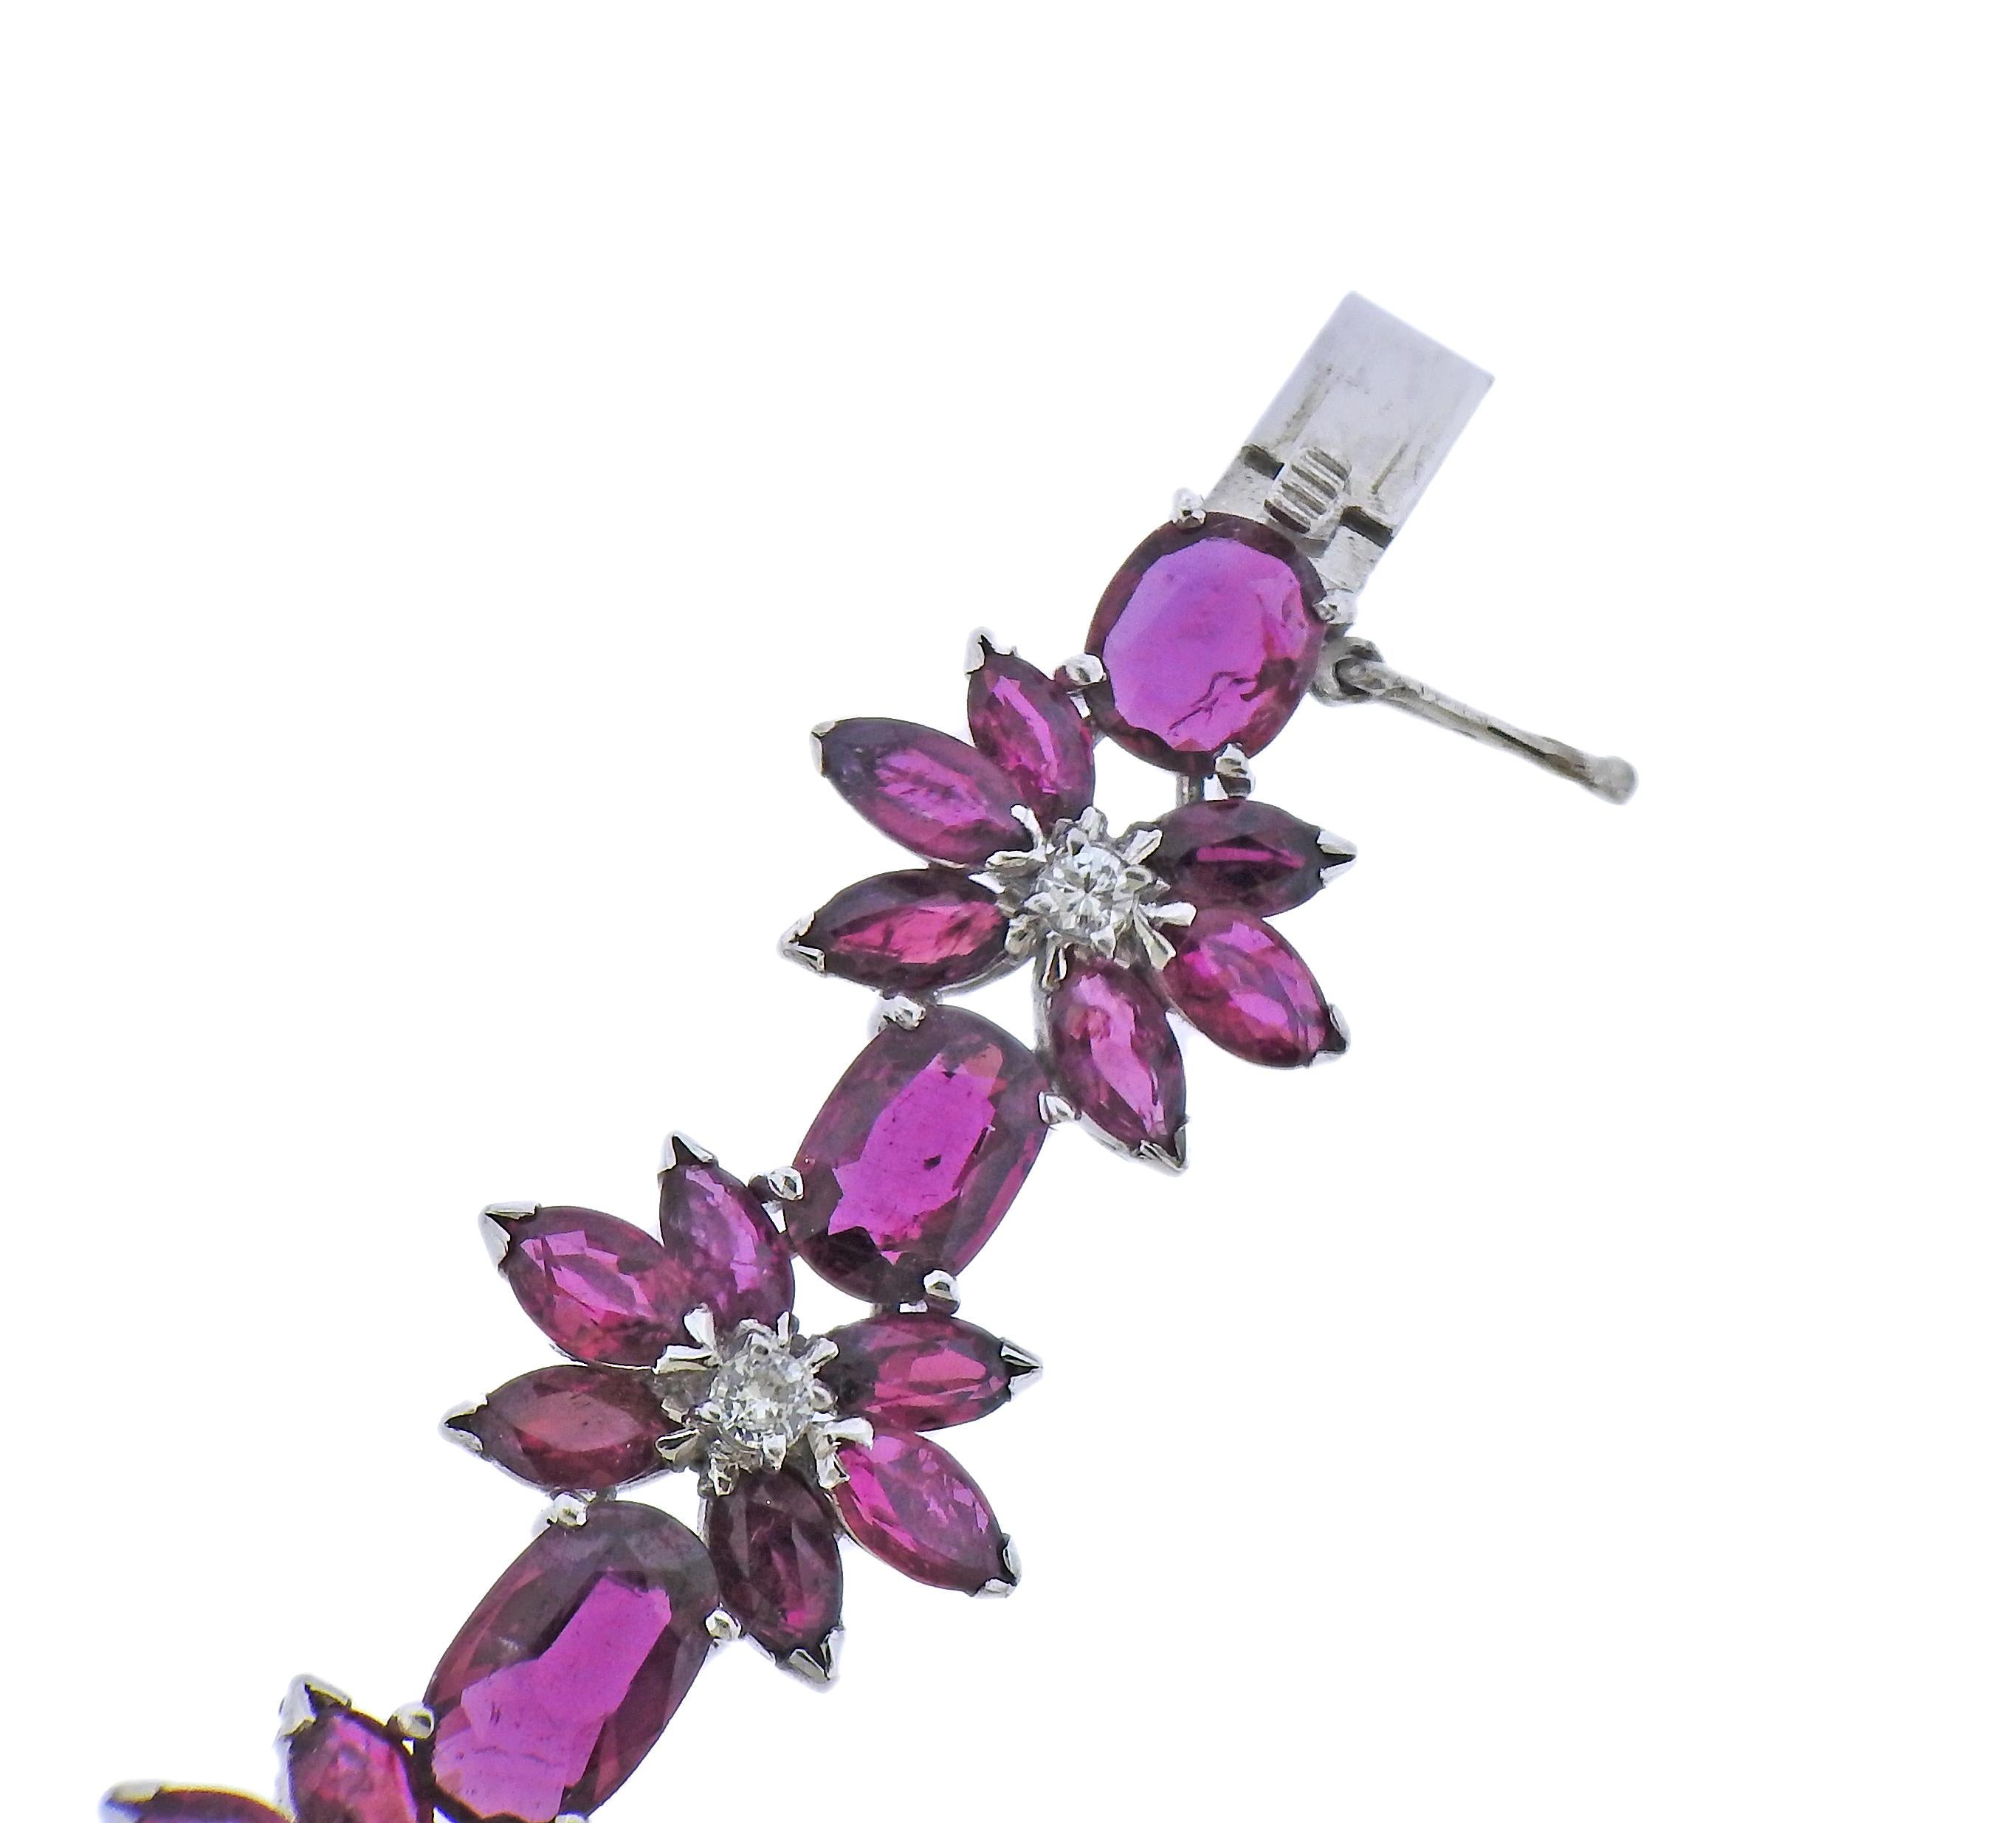 18k white gold flower bracelet with rubies and approx. 0.33ctw in diamonds. Bracelet is 6.5